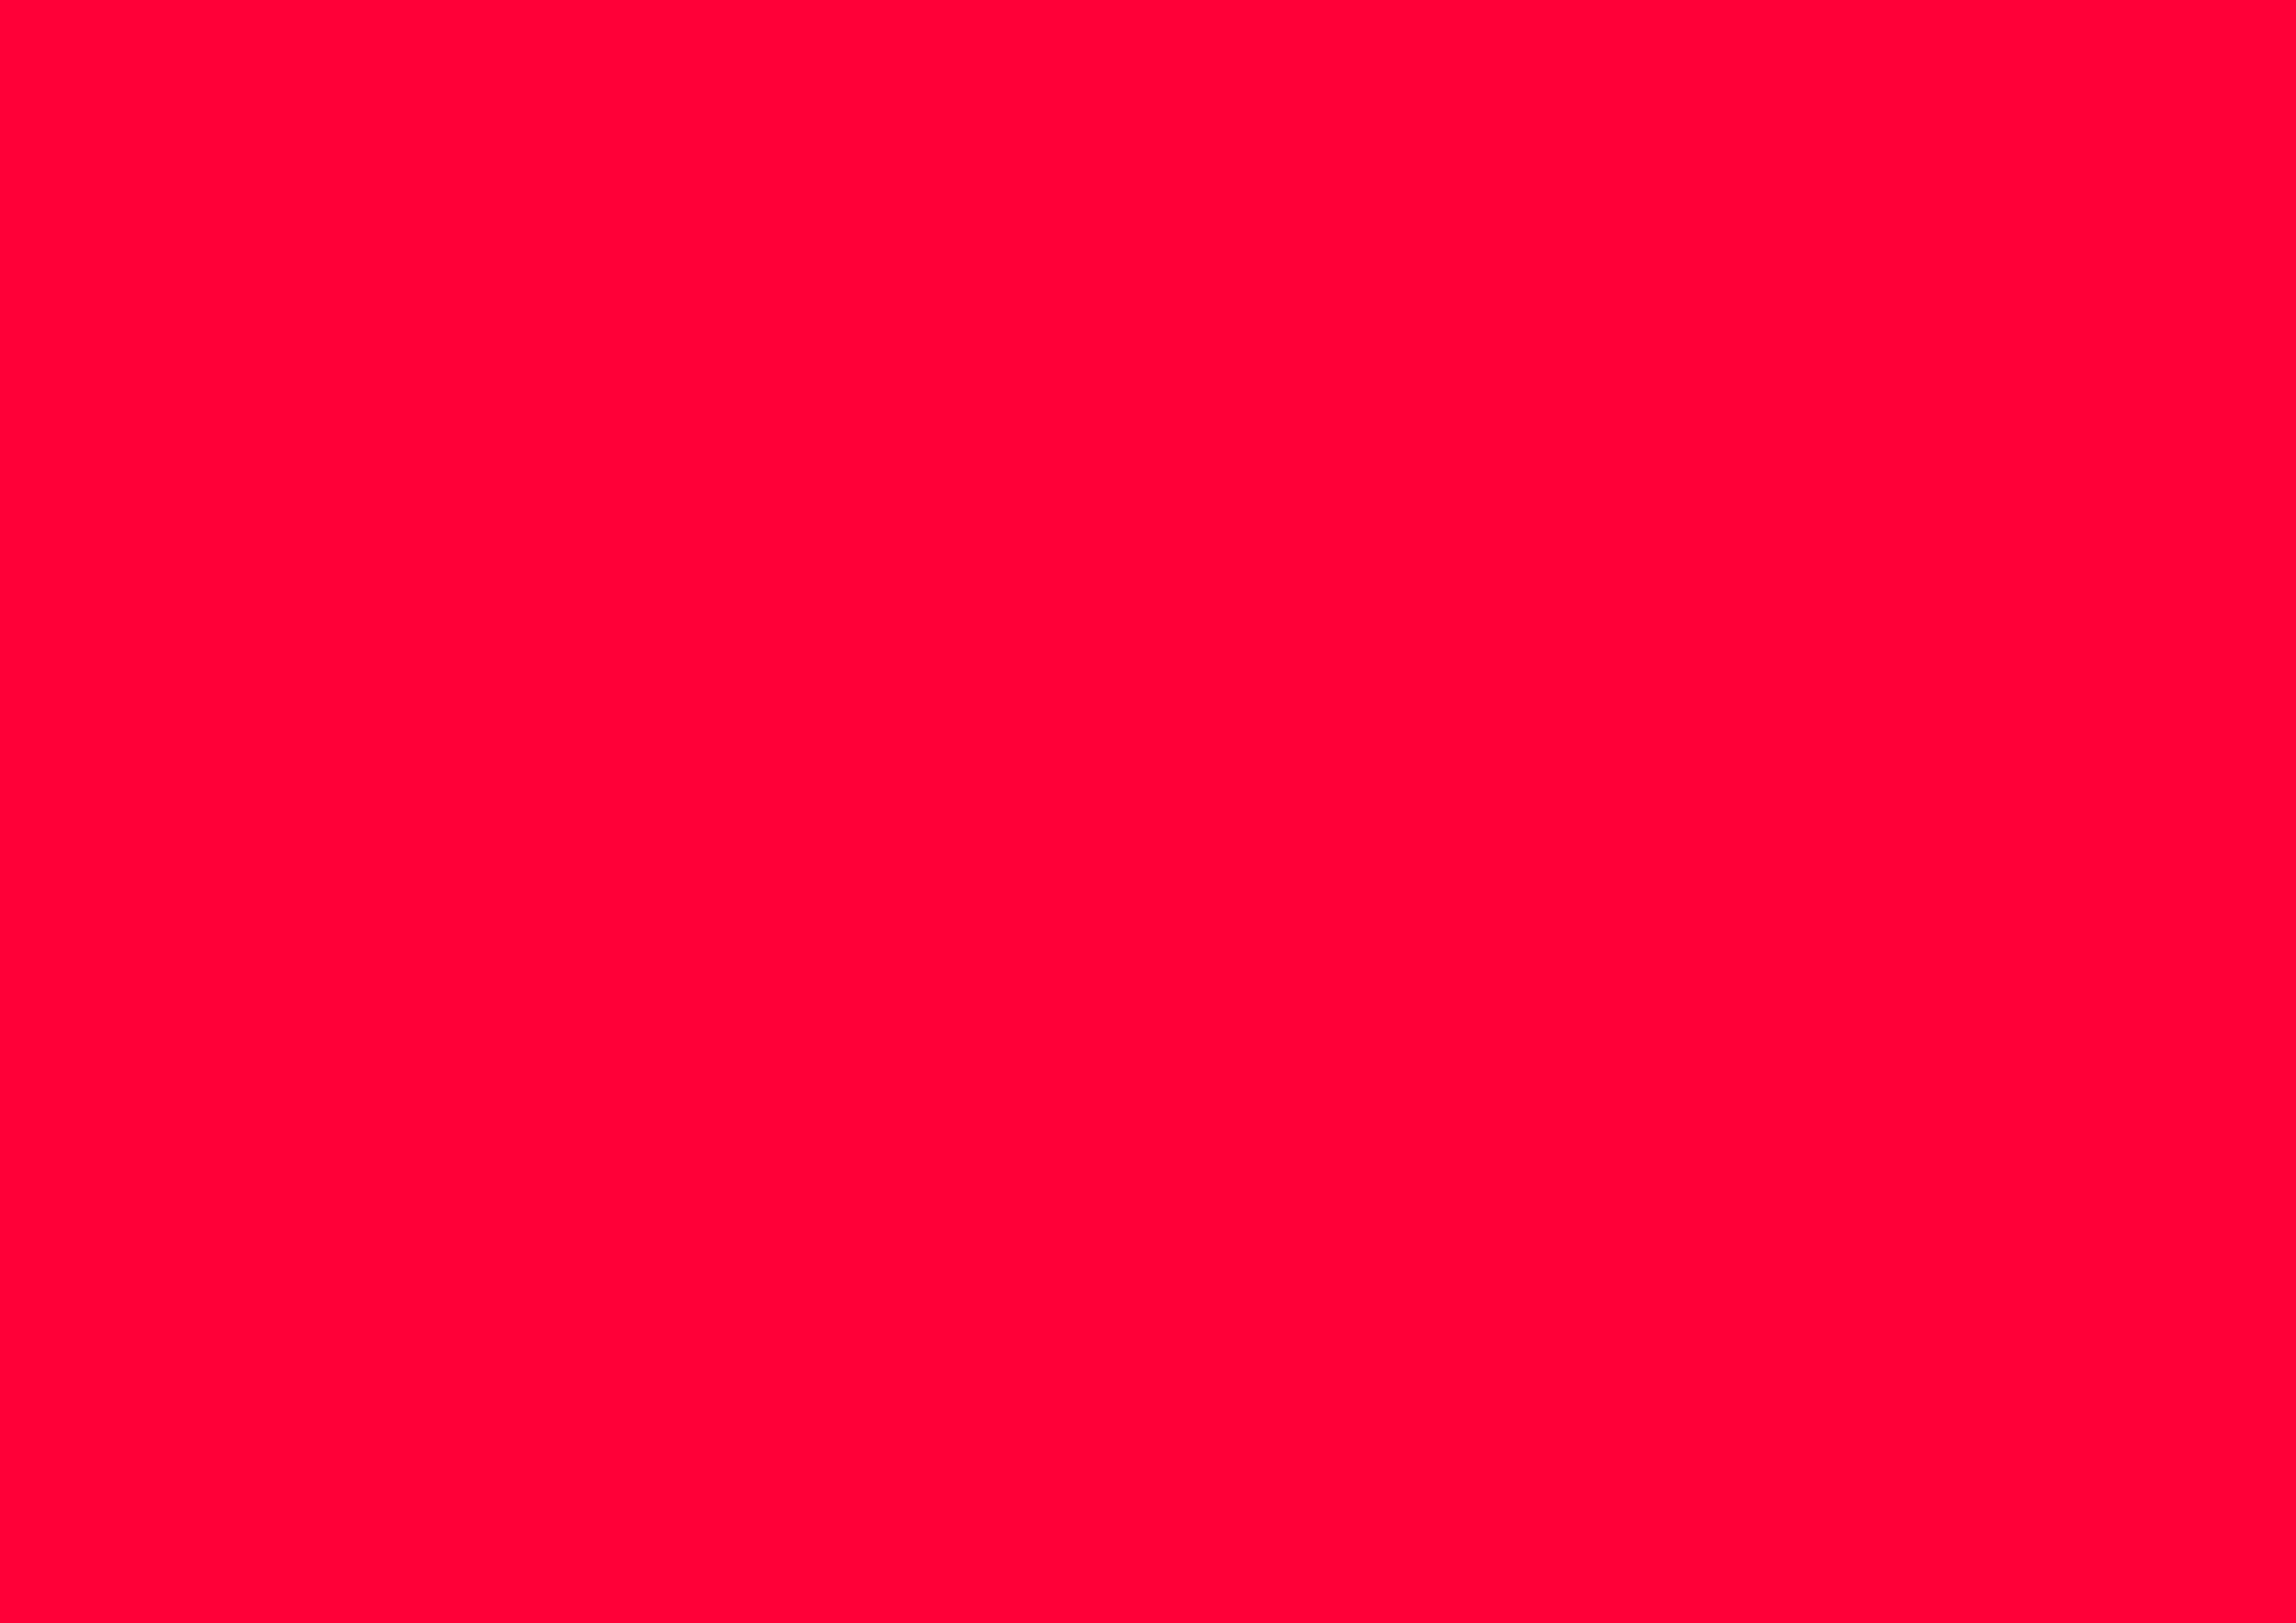 3508x2480 Carmine Red Solid Color Background